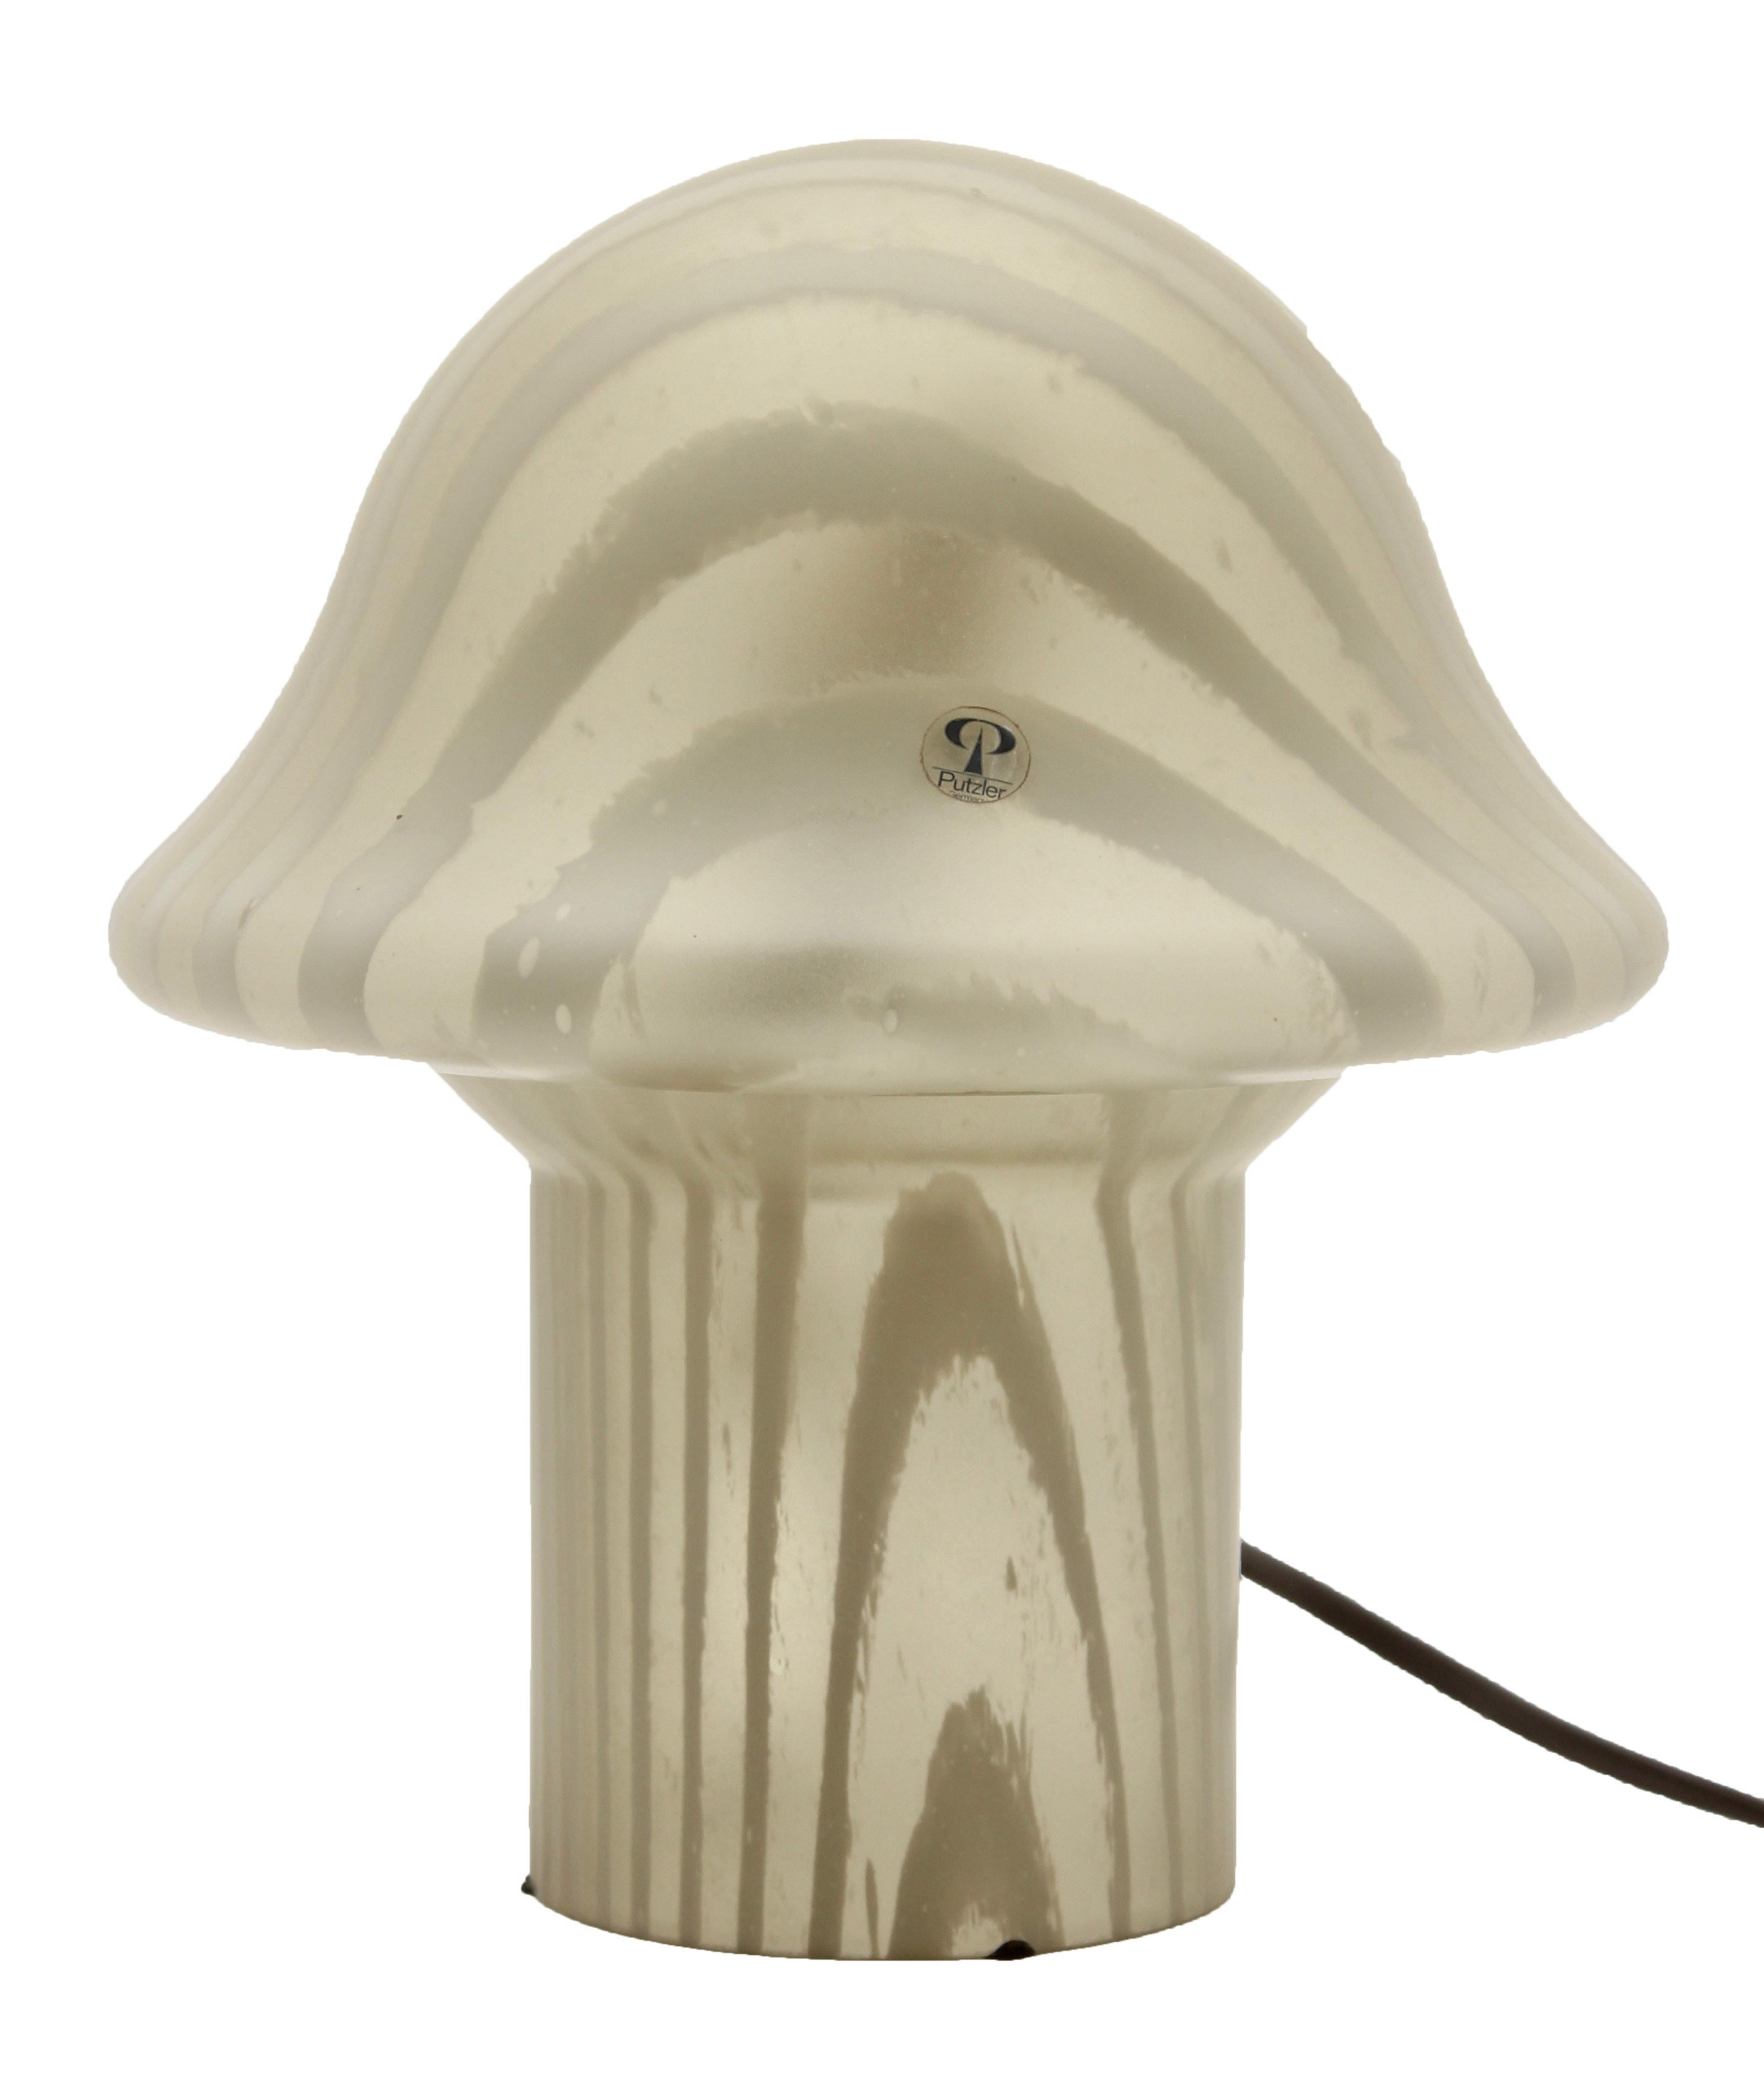 Unique Mid-Century Modernist German 1960s mushroom table lamp by Peill & Putzler

This unique Mid-Century Modernist German 1960s table lamp was designed by Peill & Putzler. It features a mushroom design made of hand blown frosted glass with hues